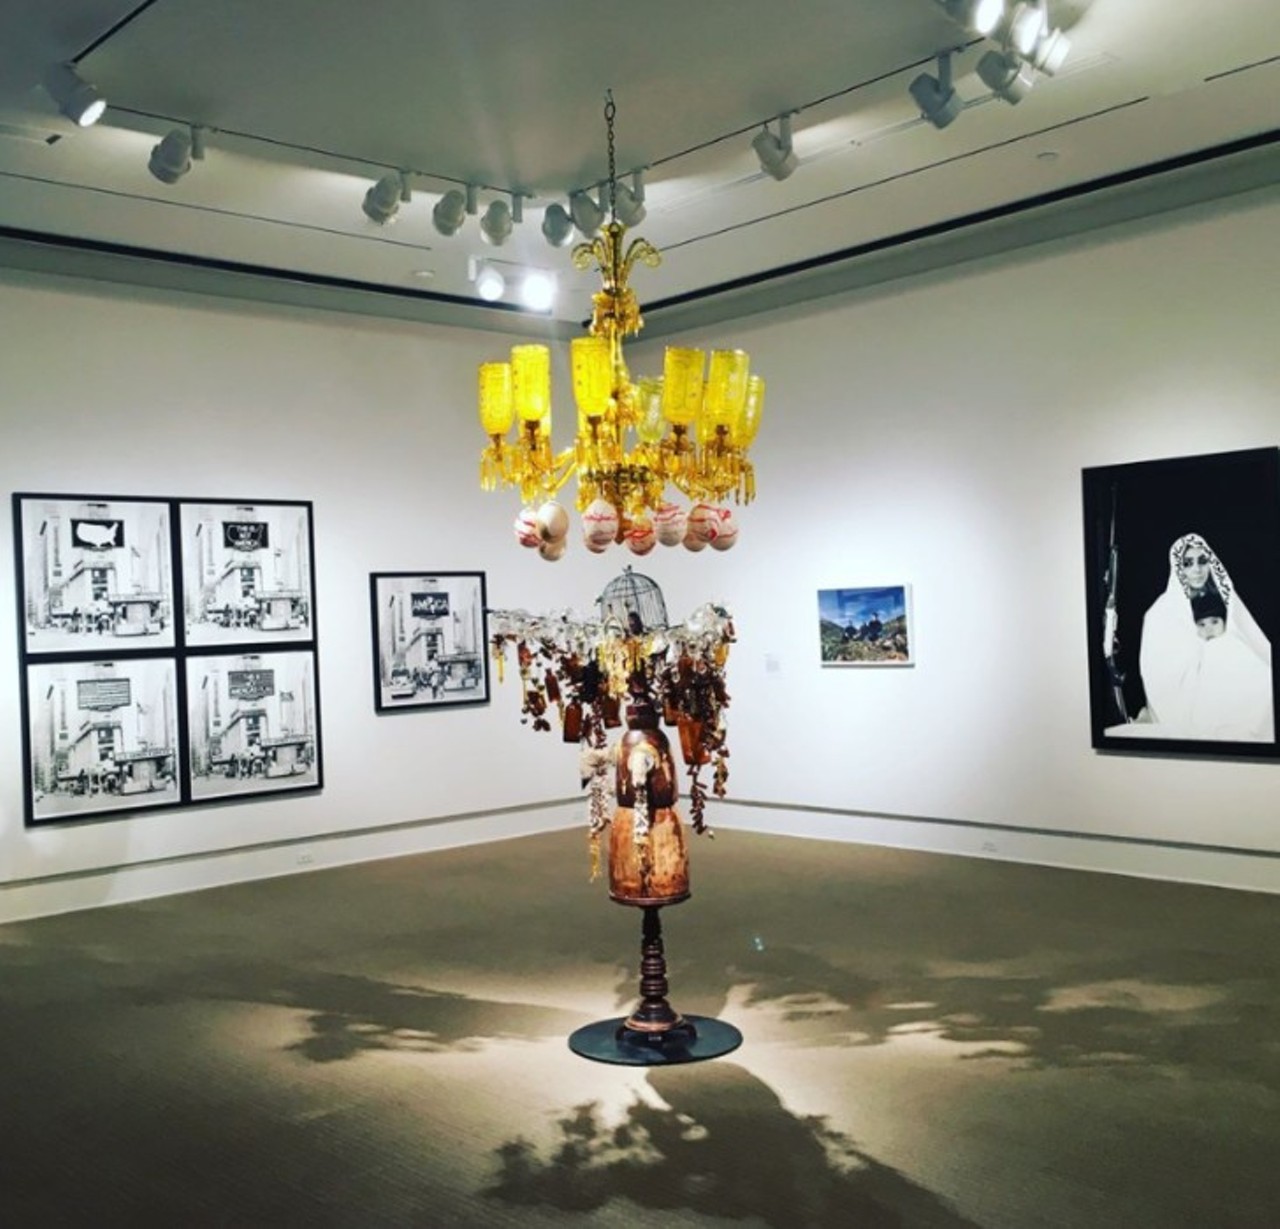 Cornell Fine Arts Museum at Rollins College
Tuesday through Sunday, Rollins College, 1000 Holt Ave., Winter Park
Enjoy art both cutting-edge contemporary and historically quaint at this campus gem. And it's free!
Photo via Cornell Fine Arts Museum/Facebook